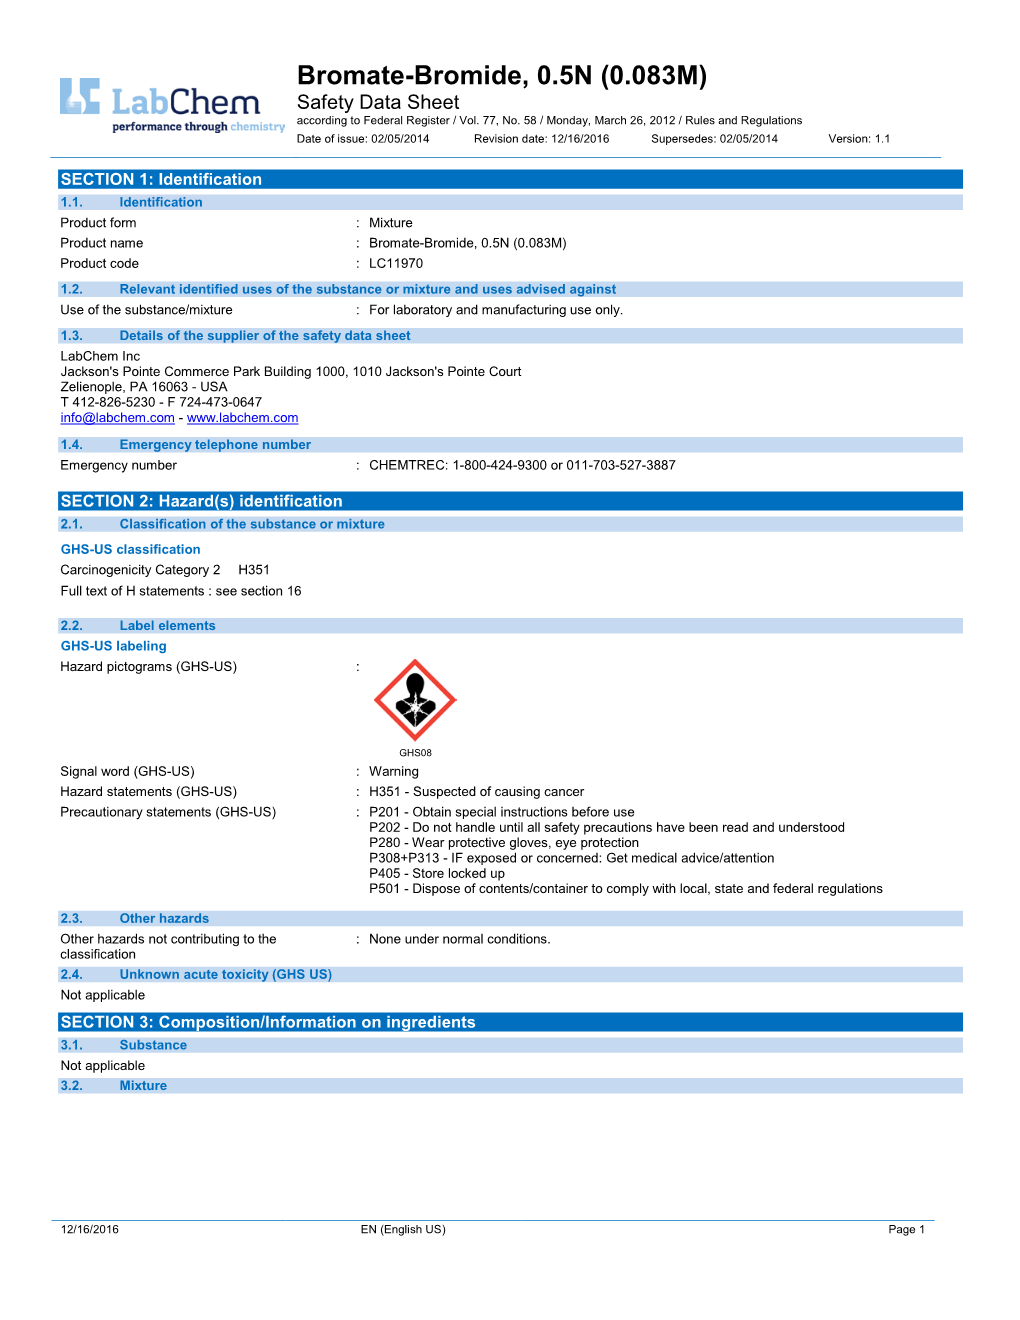 Bromate-Bromide, 0.5N (0.083M) Safety Data Sheet According to Federal Register / Vol